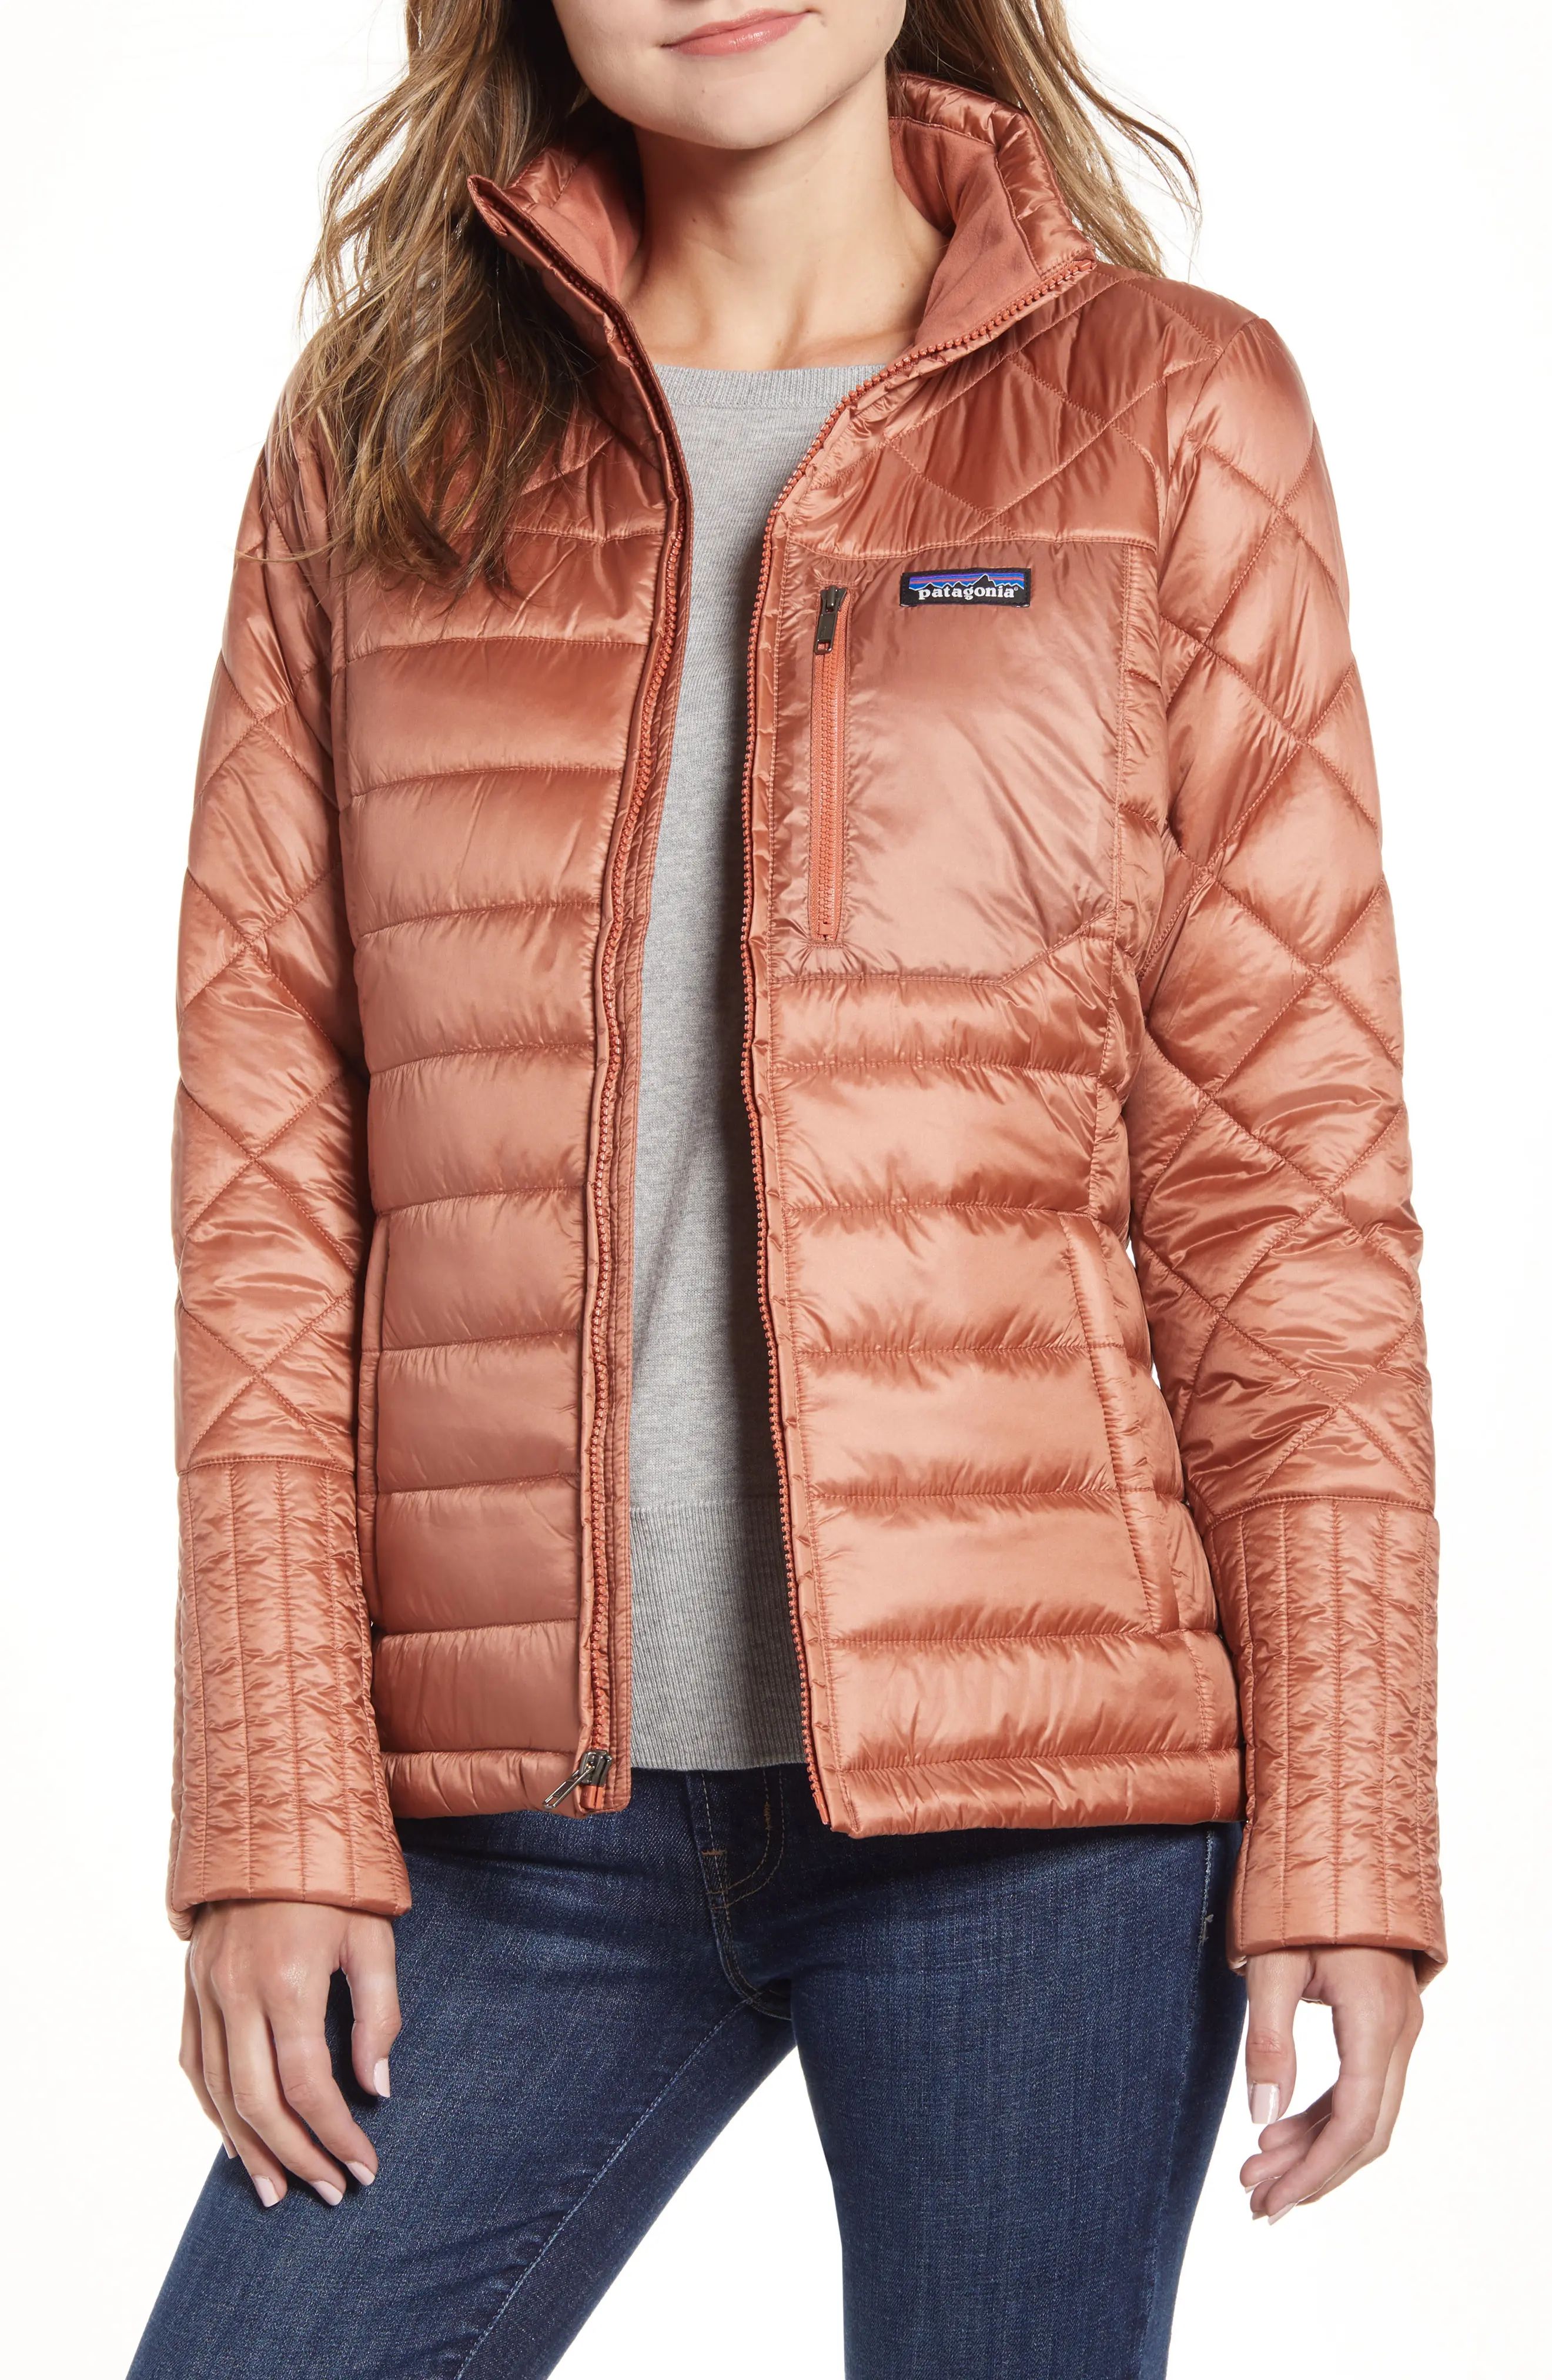 Women's Patagonia Radalie Water Repellent Thermogreen-Insulated Jacket, Size Small - Pink | Nordstrom